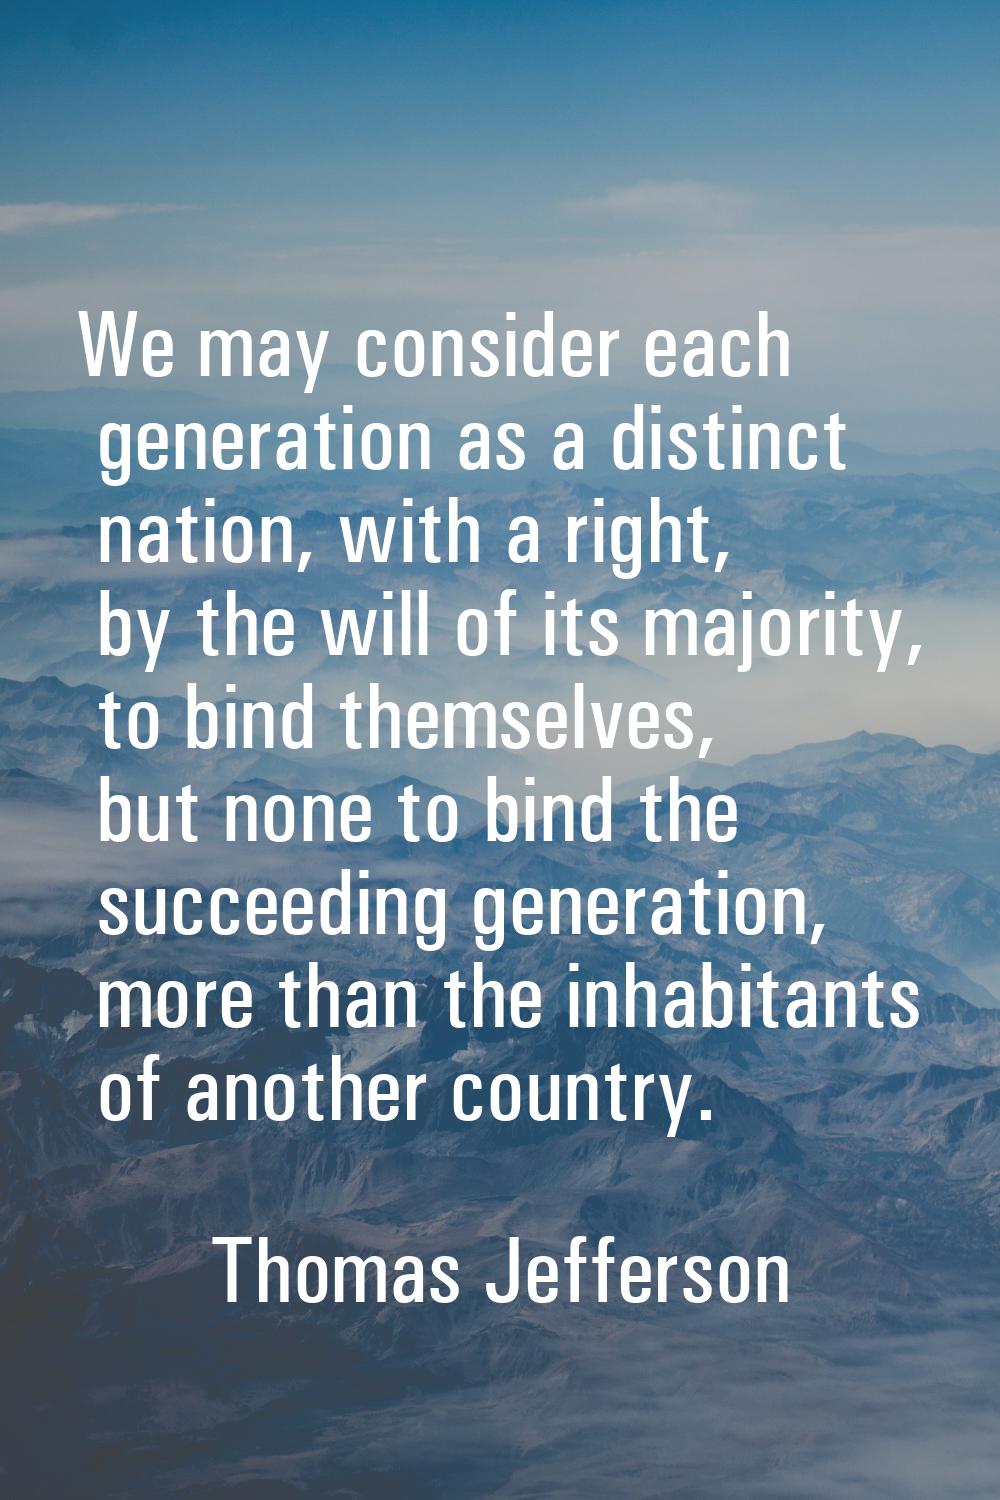 We may consider each generation as a distinct nation, with a right, by the will of its majority, to